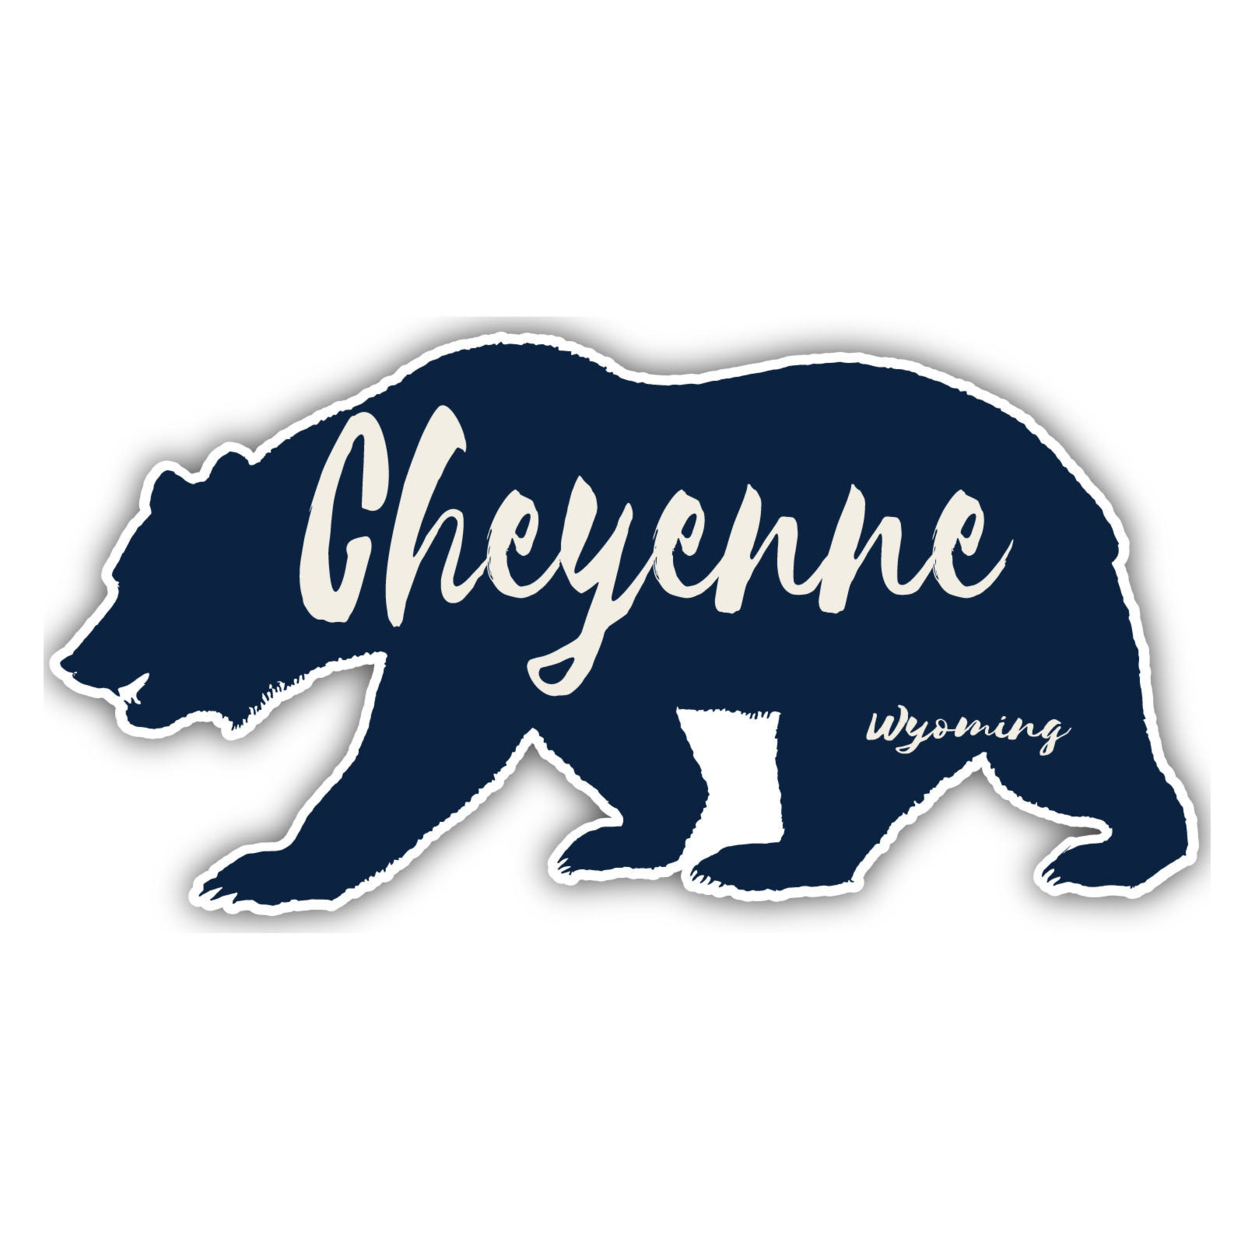 Cheyenne Wyoming Souvenir Decorative Stickers (Choose Theme And Size) - Single Unit, 6-Inch, Camp Life